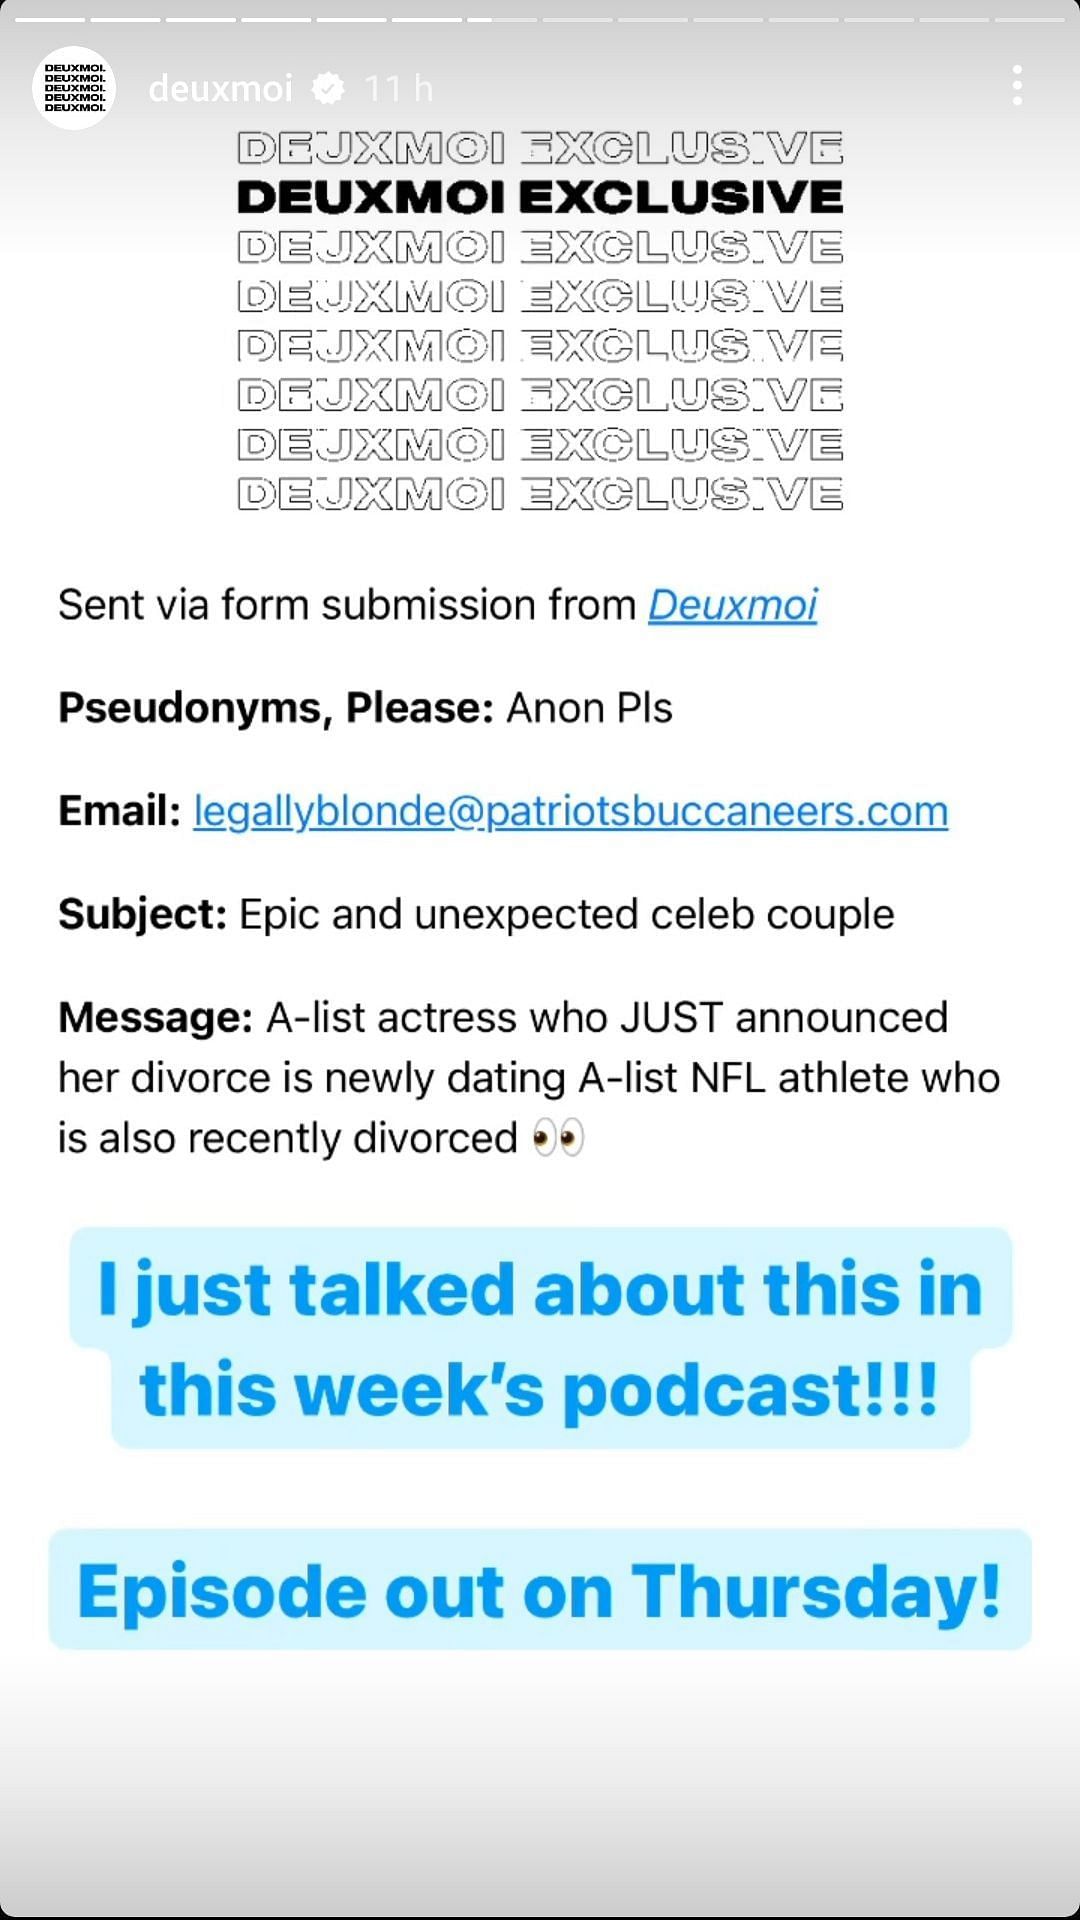 r/FauxMoi receives an anonymous tip on Tom Brady and Reese Witherspoon